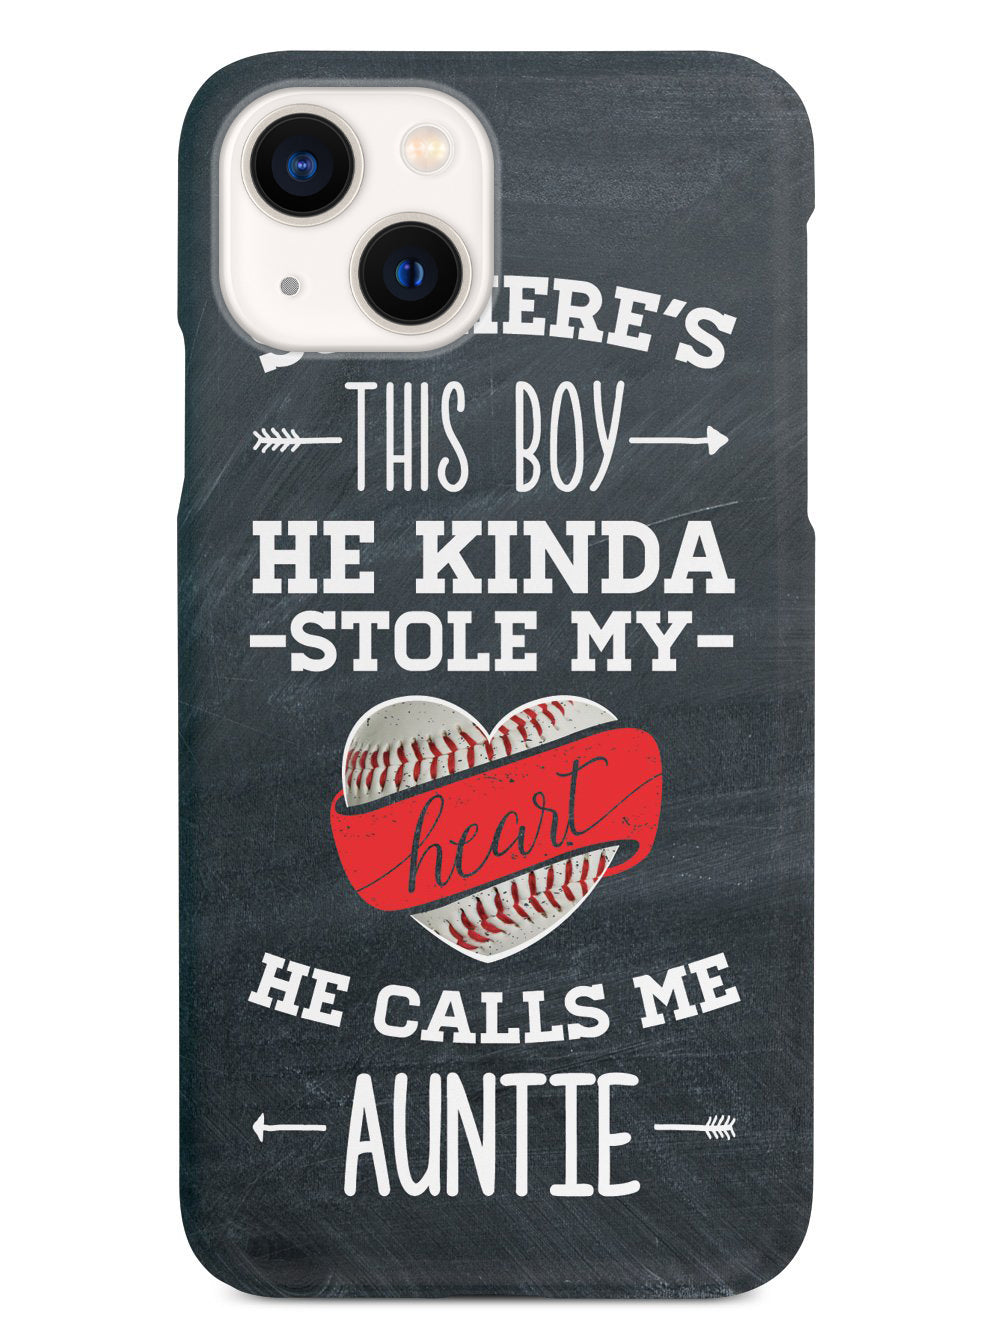 So There's This Boy... Baseball Player - Auntie Case